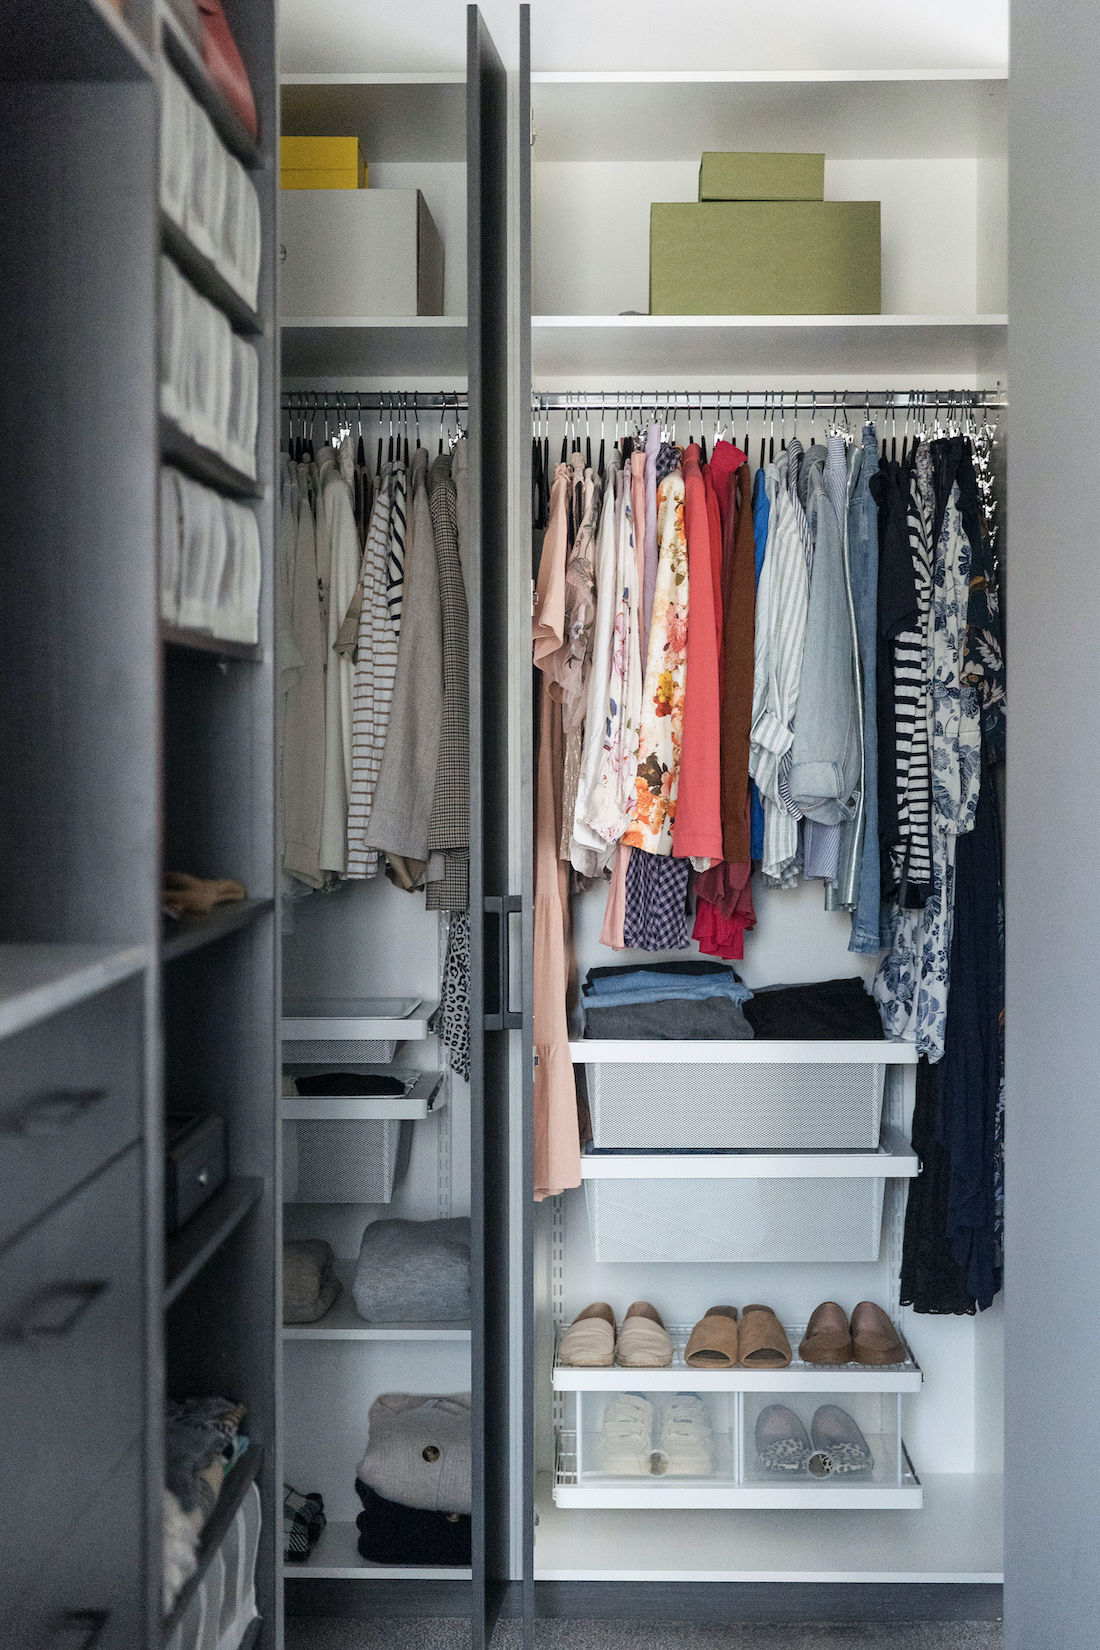 Organising your wardrobe by colour get your home ready for the new year